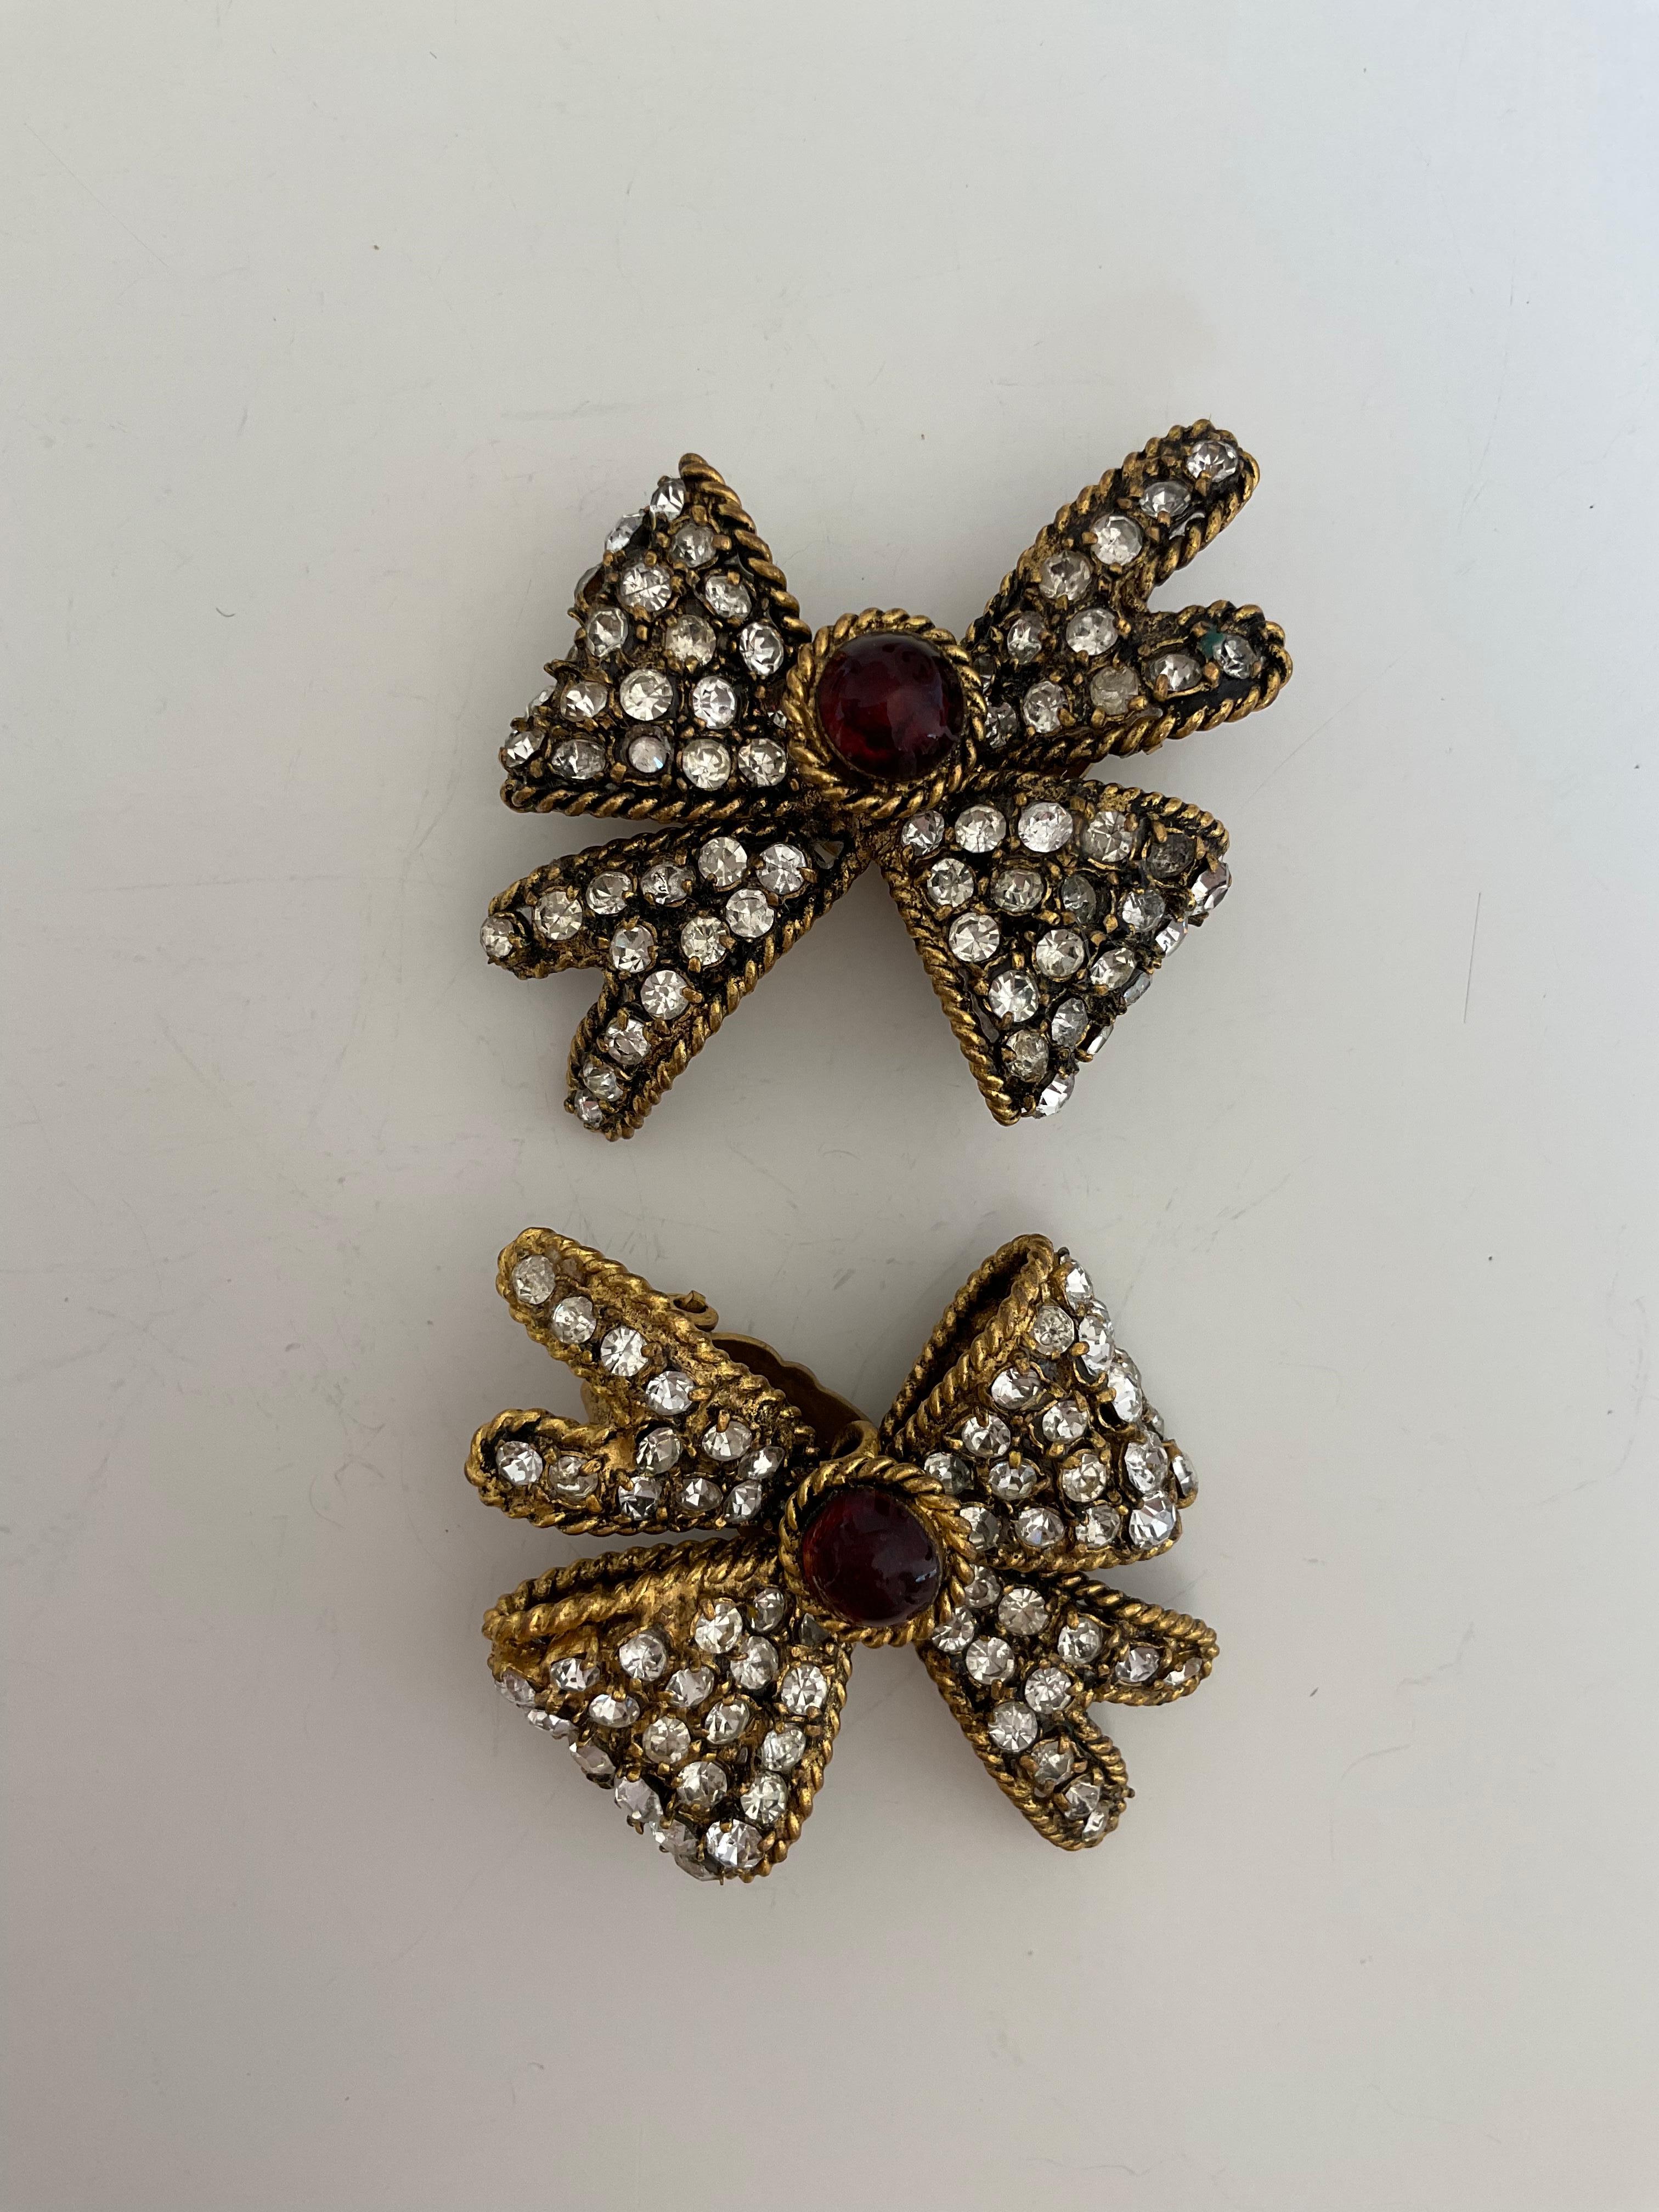 This pair of earrings are rare Vintage from the House of CHANEL from the 80's. Designed like dainty bows, those clip-on earrings are gold plated, encrusted with rhinestones and a round dark red stone in “pate de verre” at the centre, where the nods